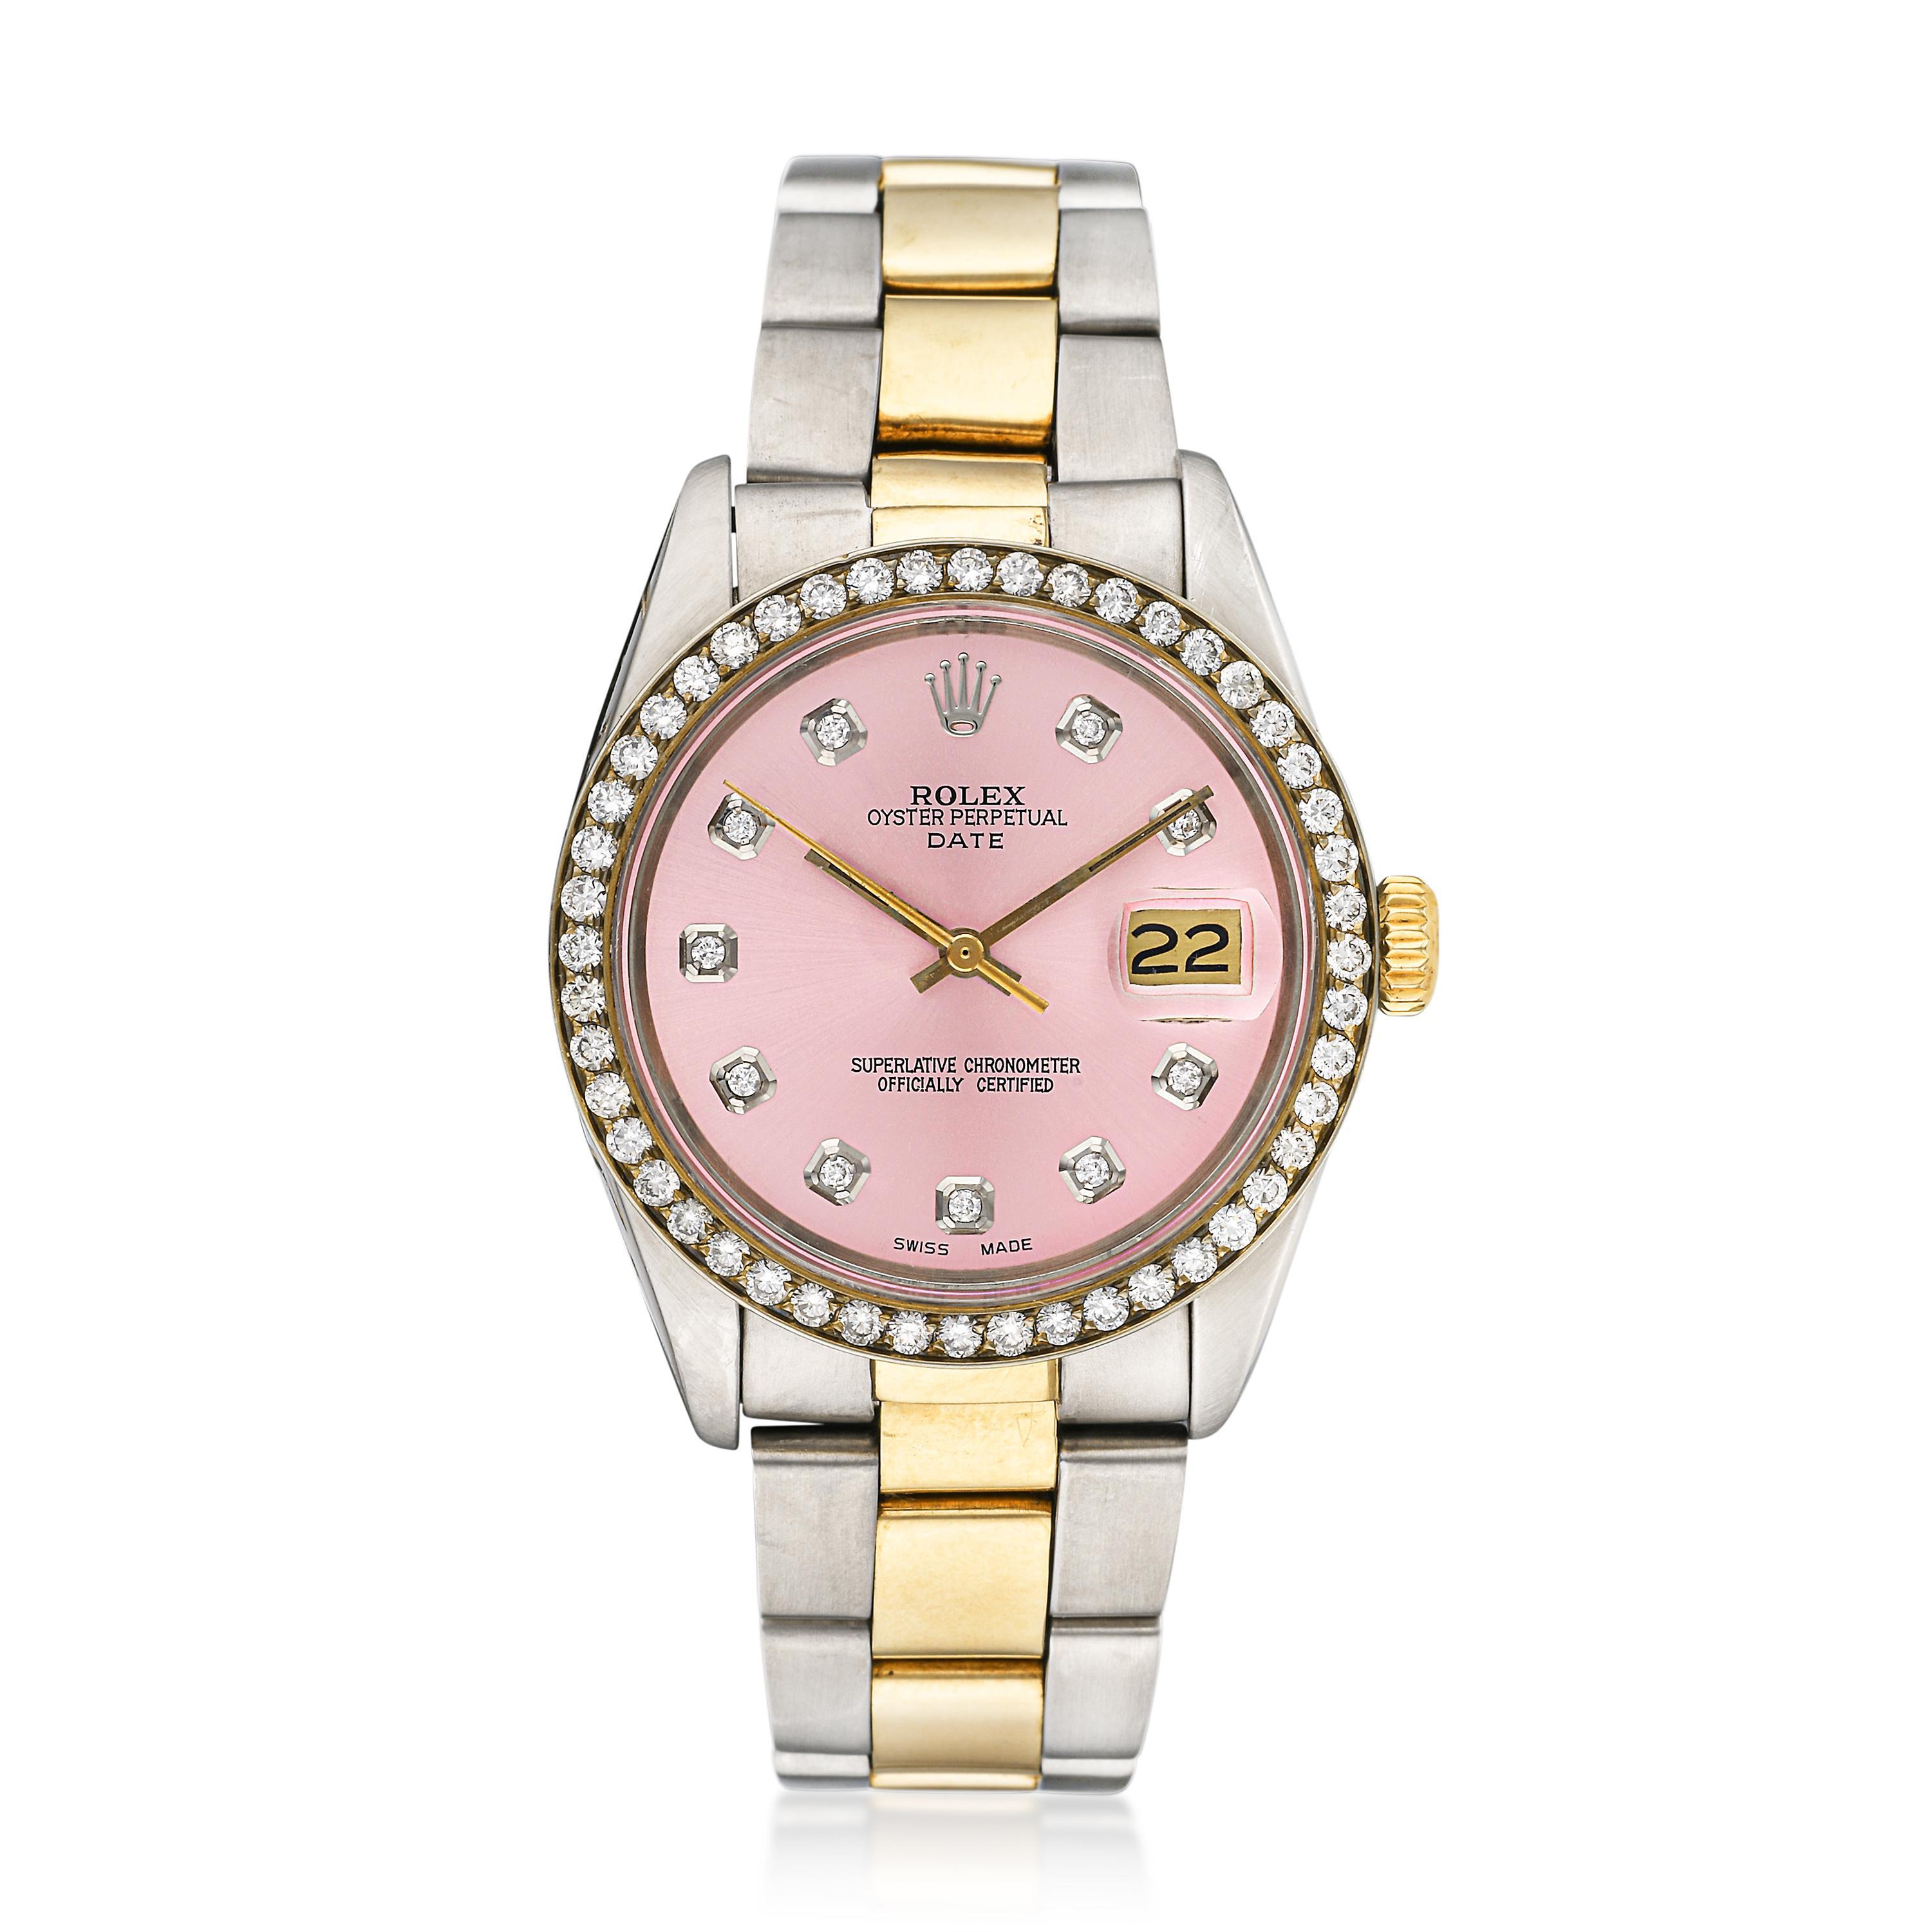 Rolex Date in Stainless Steel and 18K Gold | Fortuna Fine Jewelry 